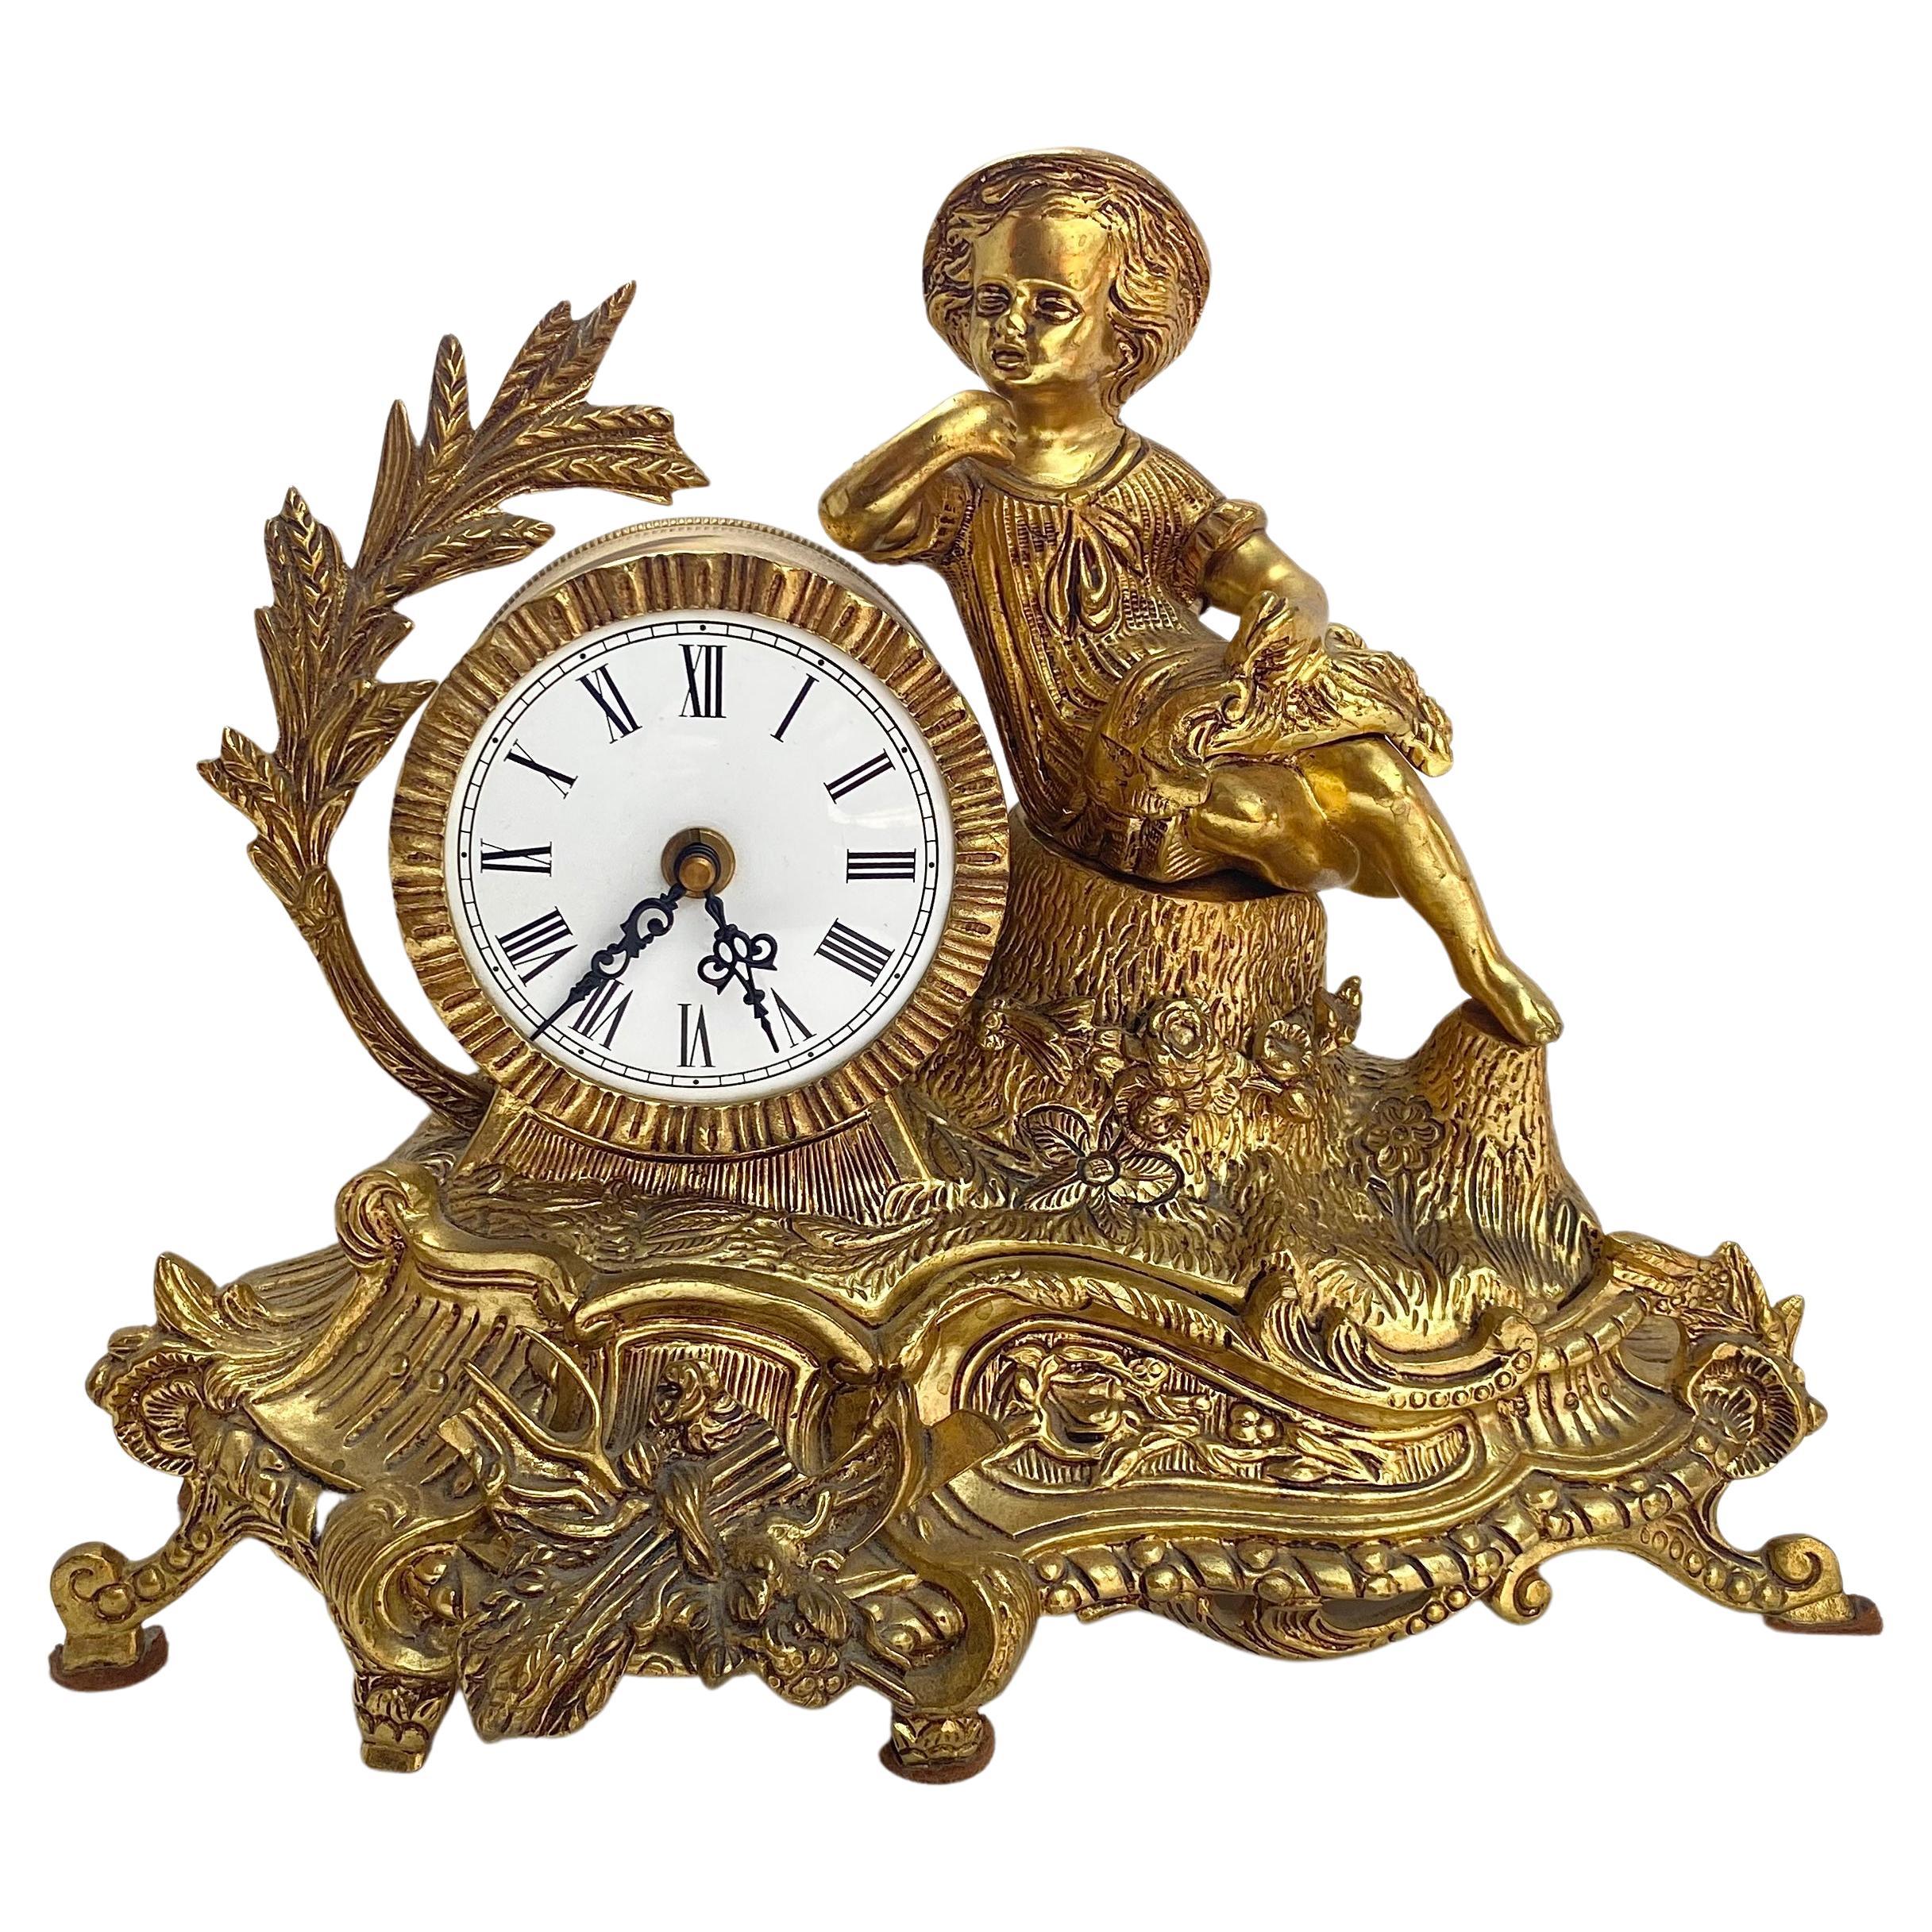 Midcentury Mantel Bronze Clock with Boy Figurine from France, circa 1960s